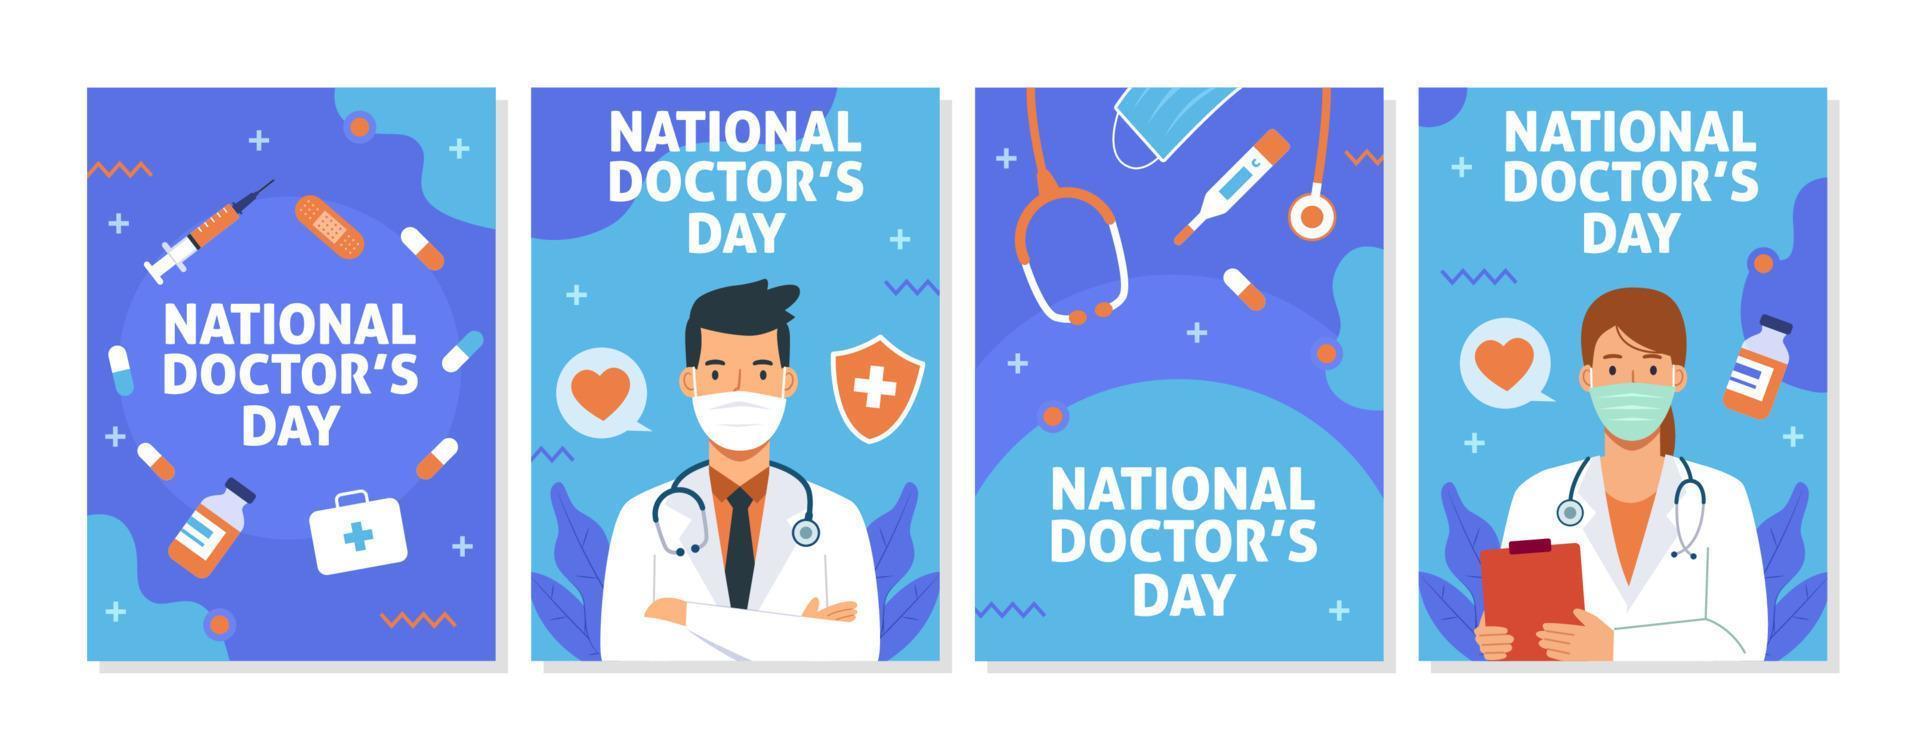 National Doctor's Day Card Set vector